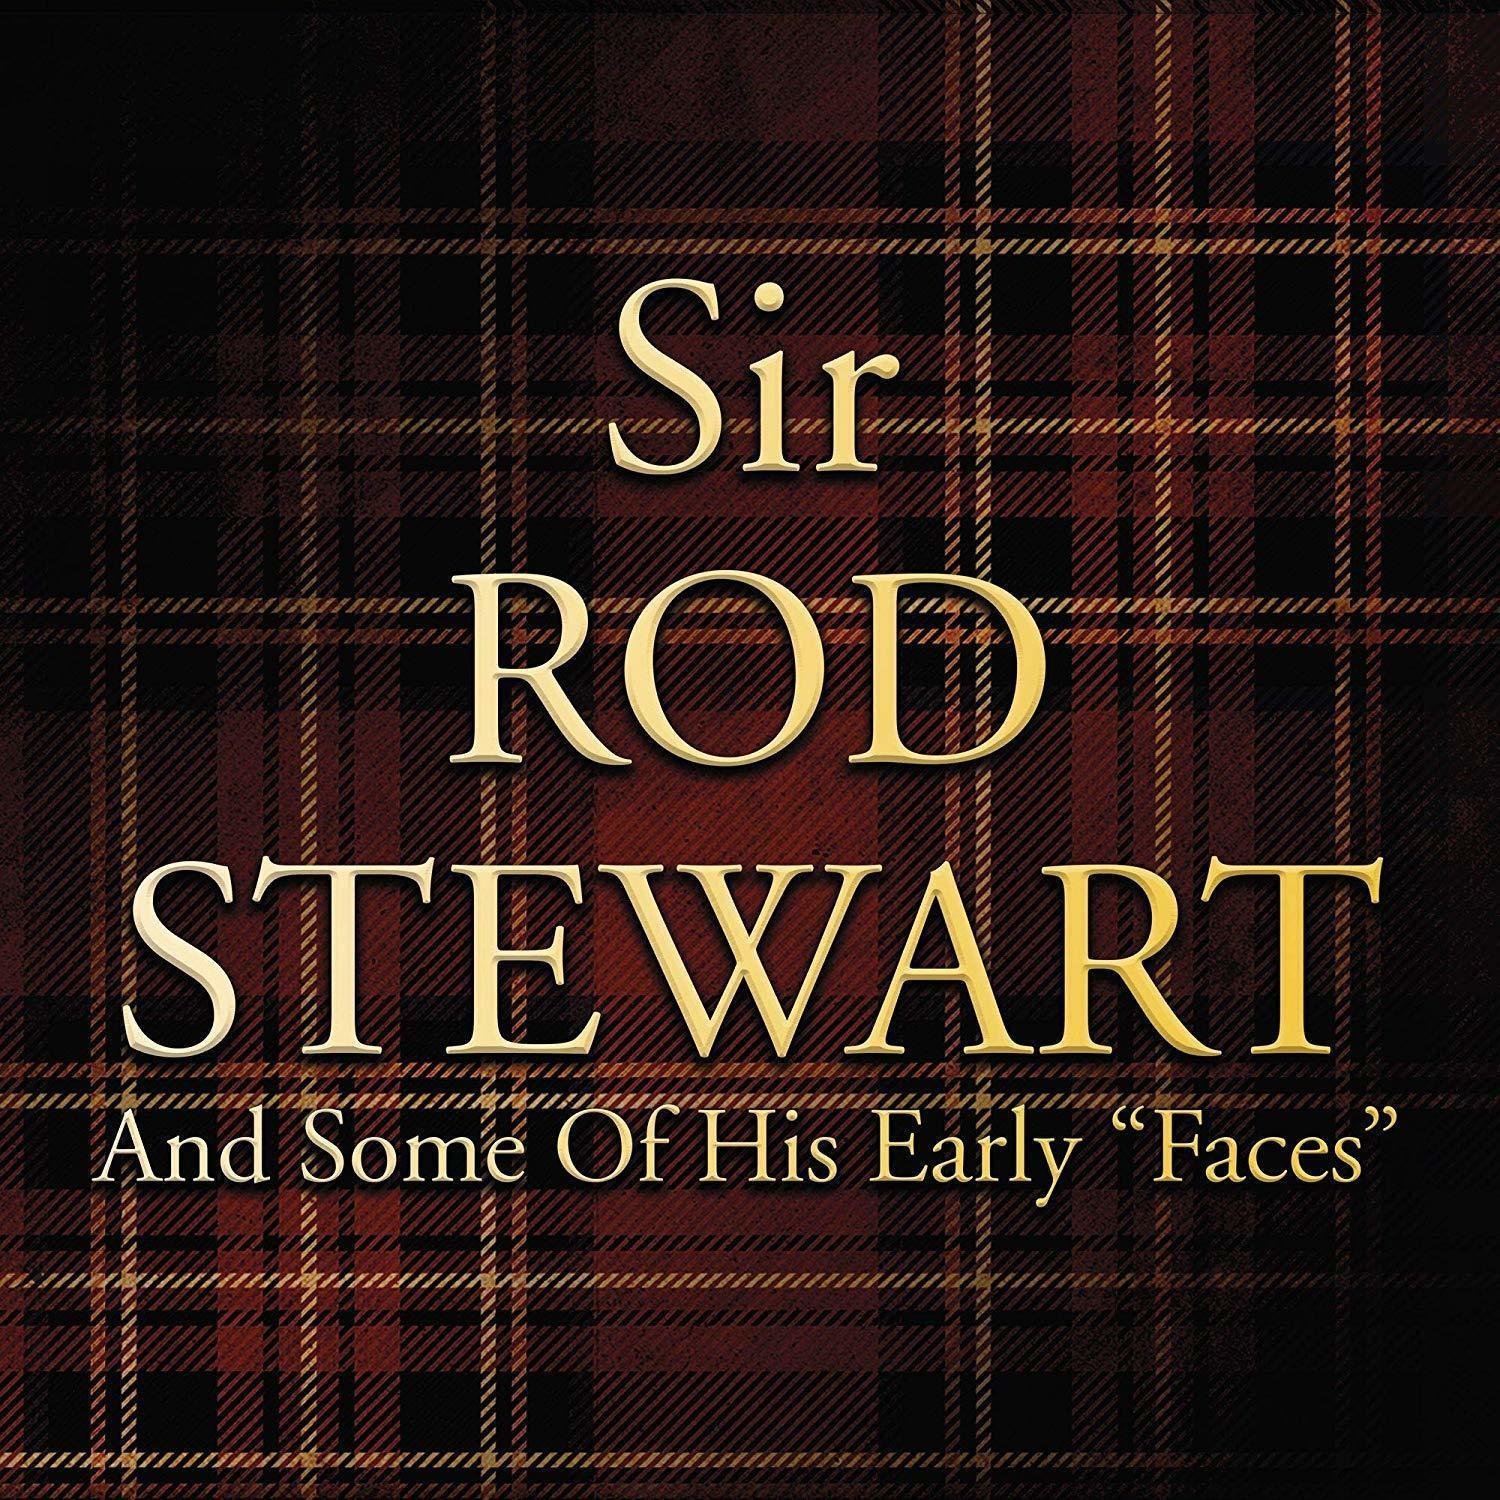 Schallplatte Rod Stewart - And Some Of His Early Faces (LP)